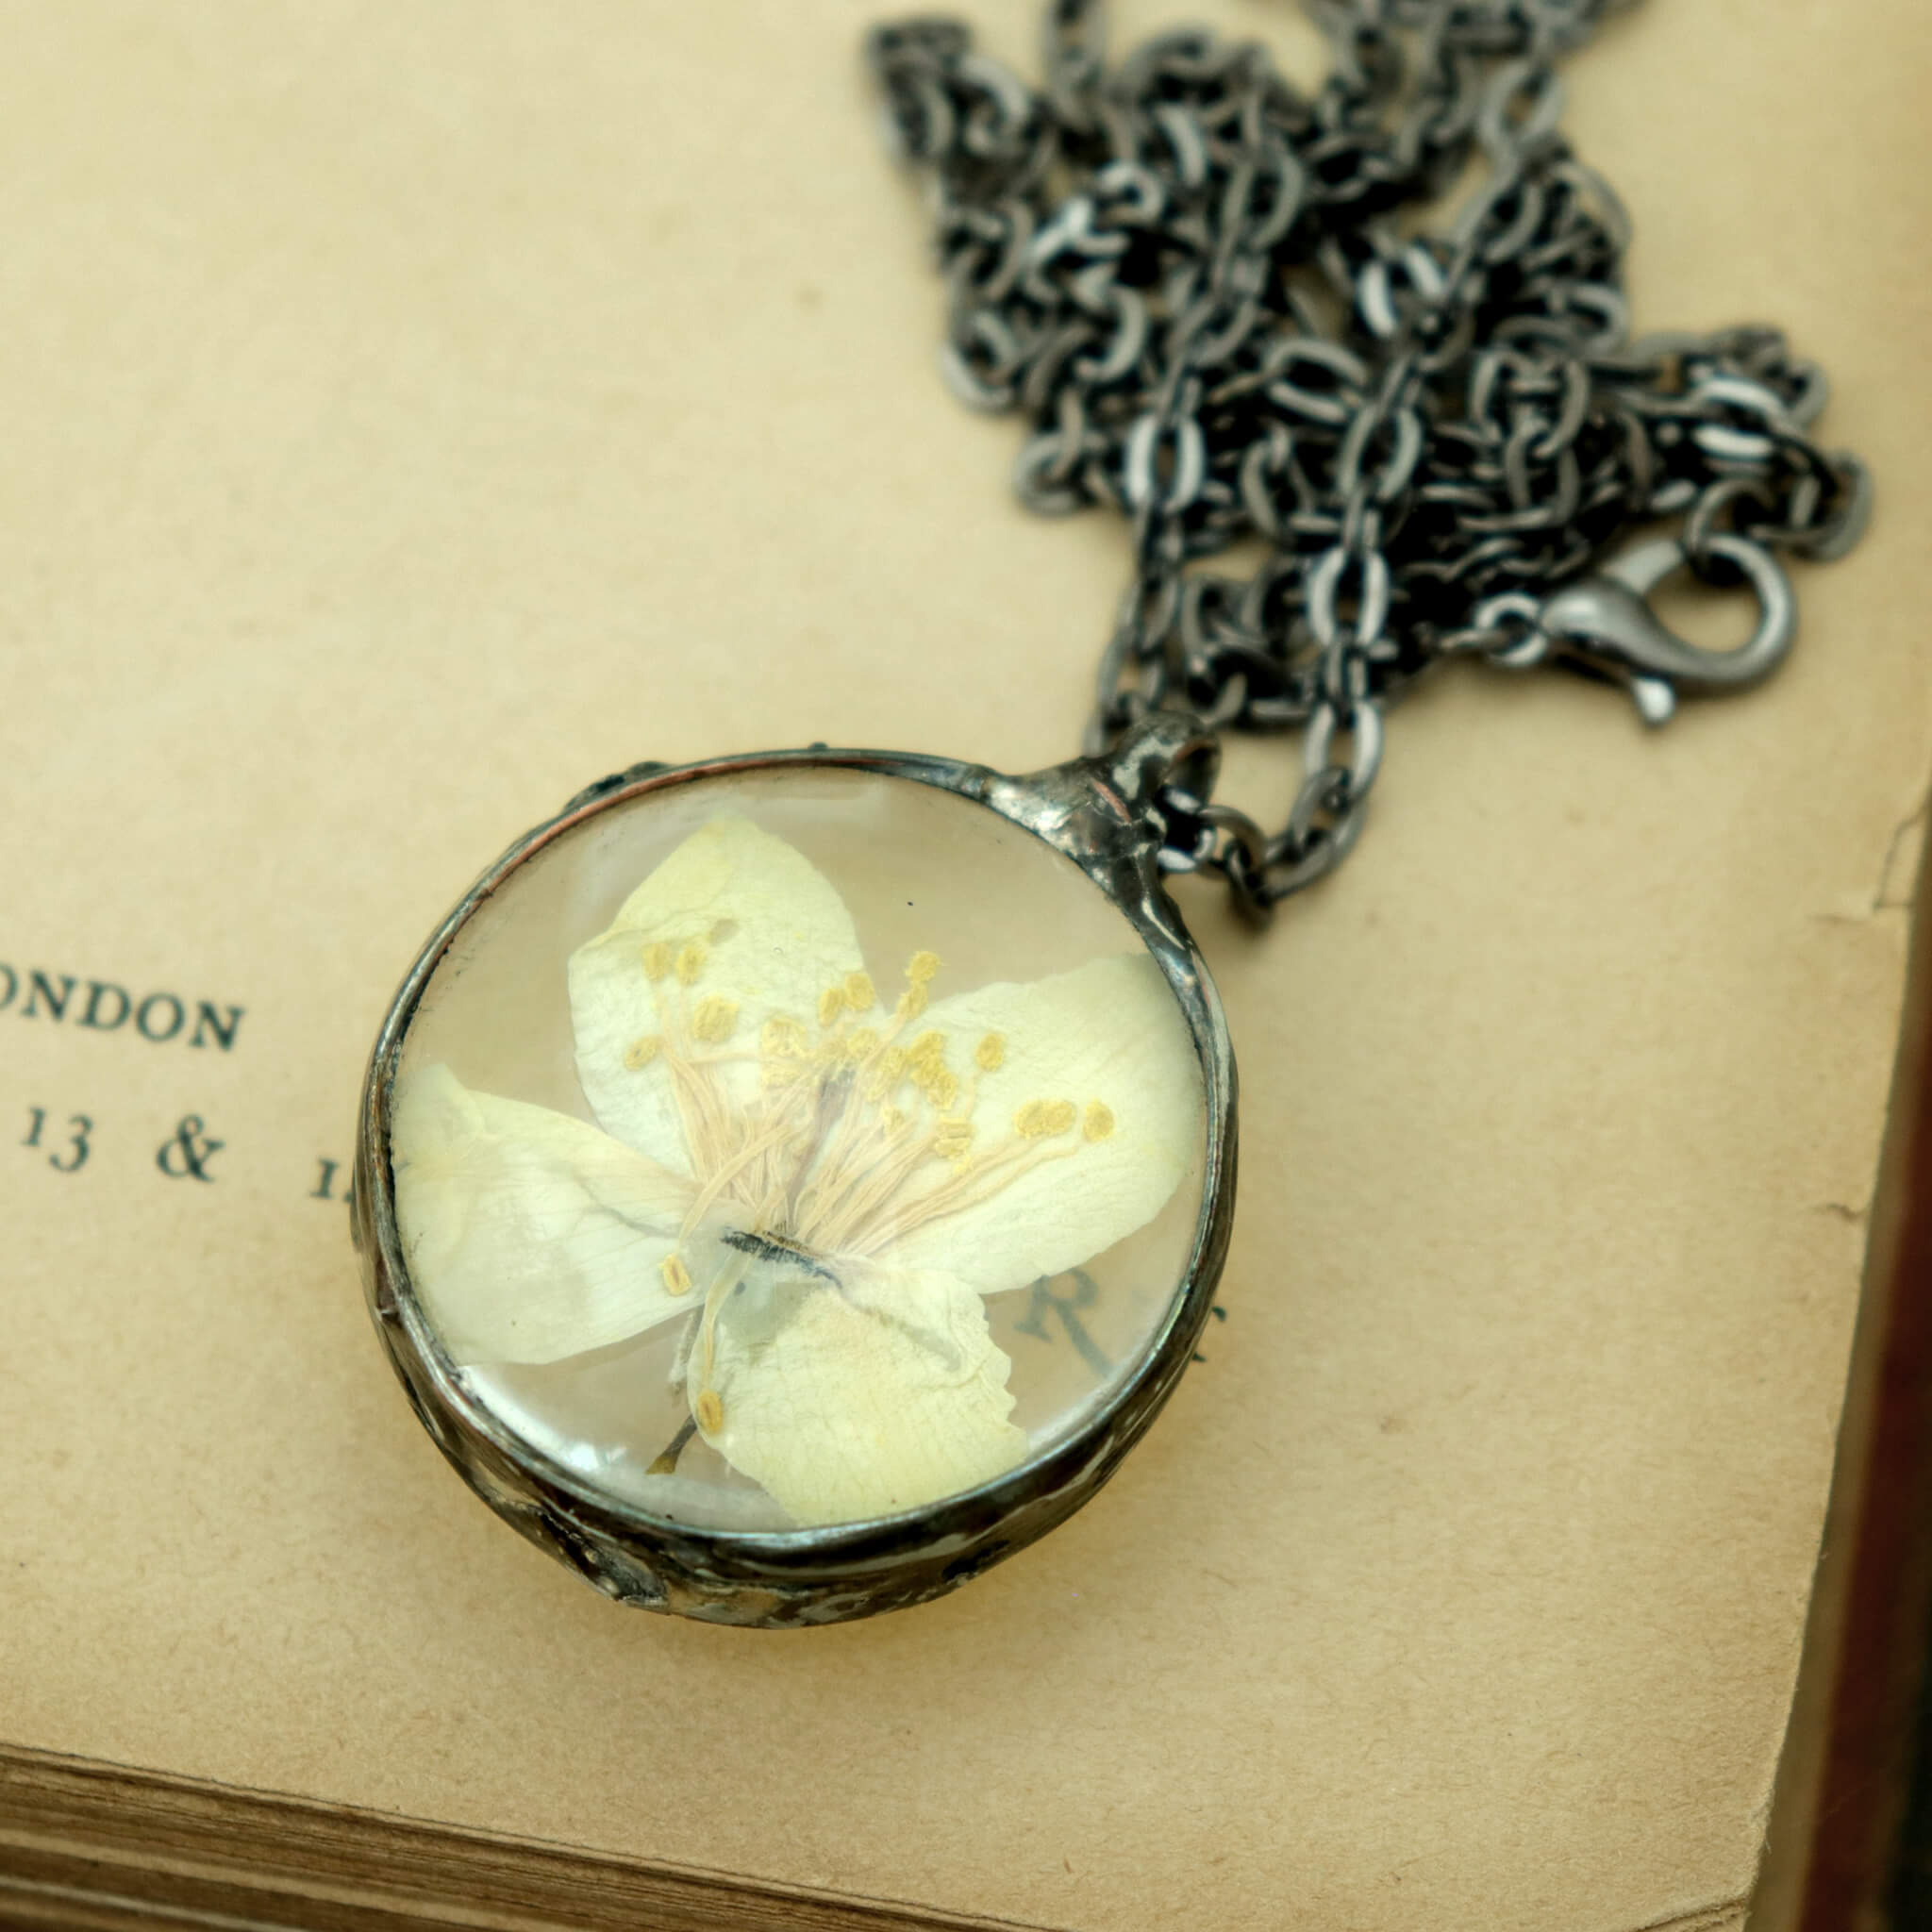 round jasmine necklace lying on a vintage book